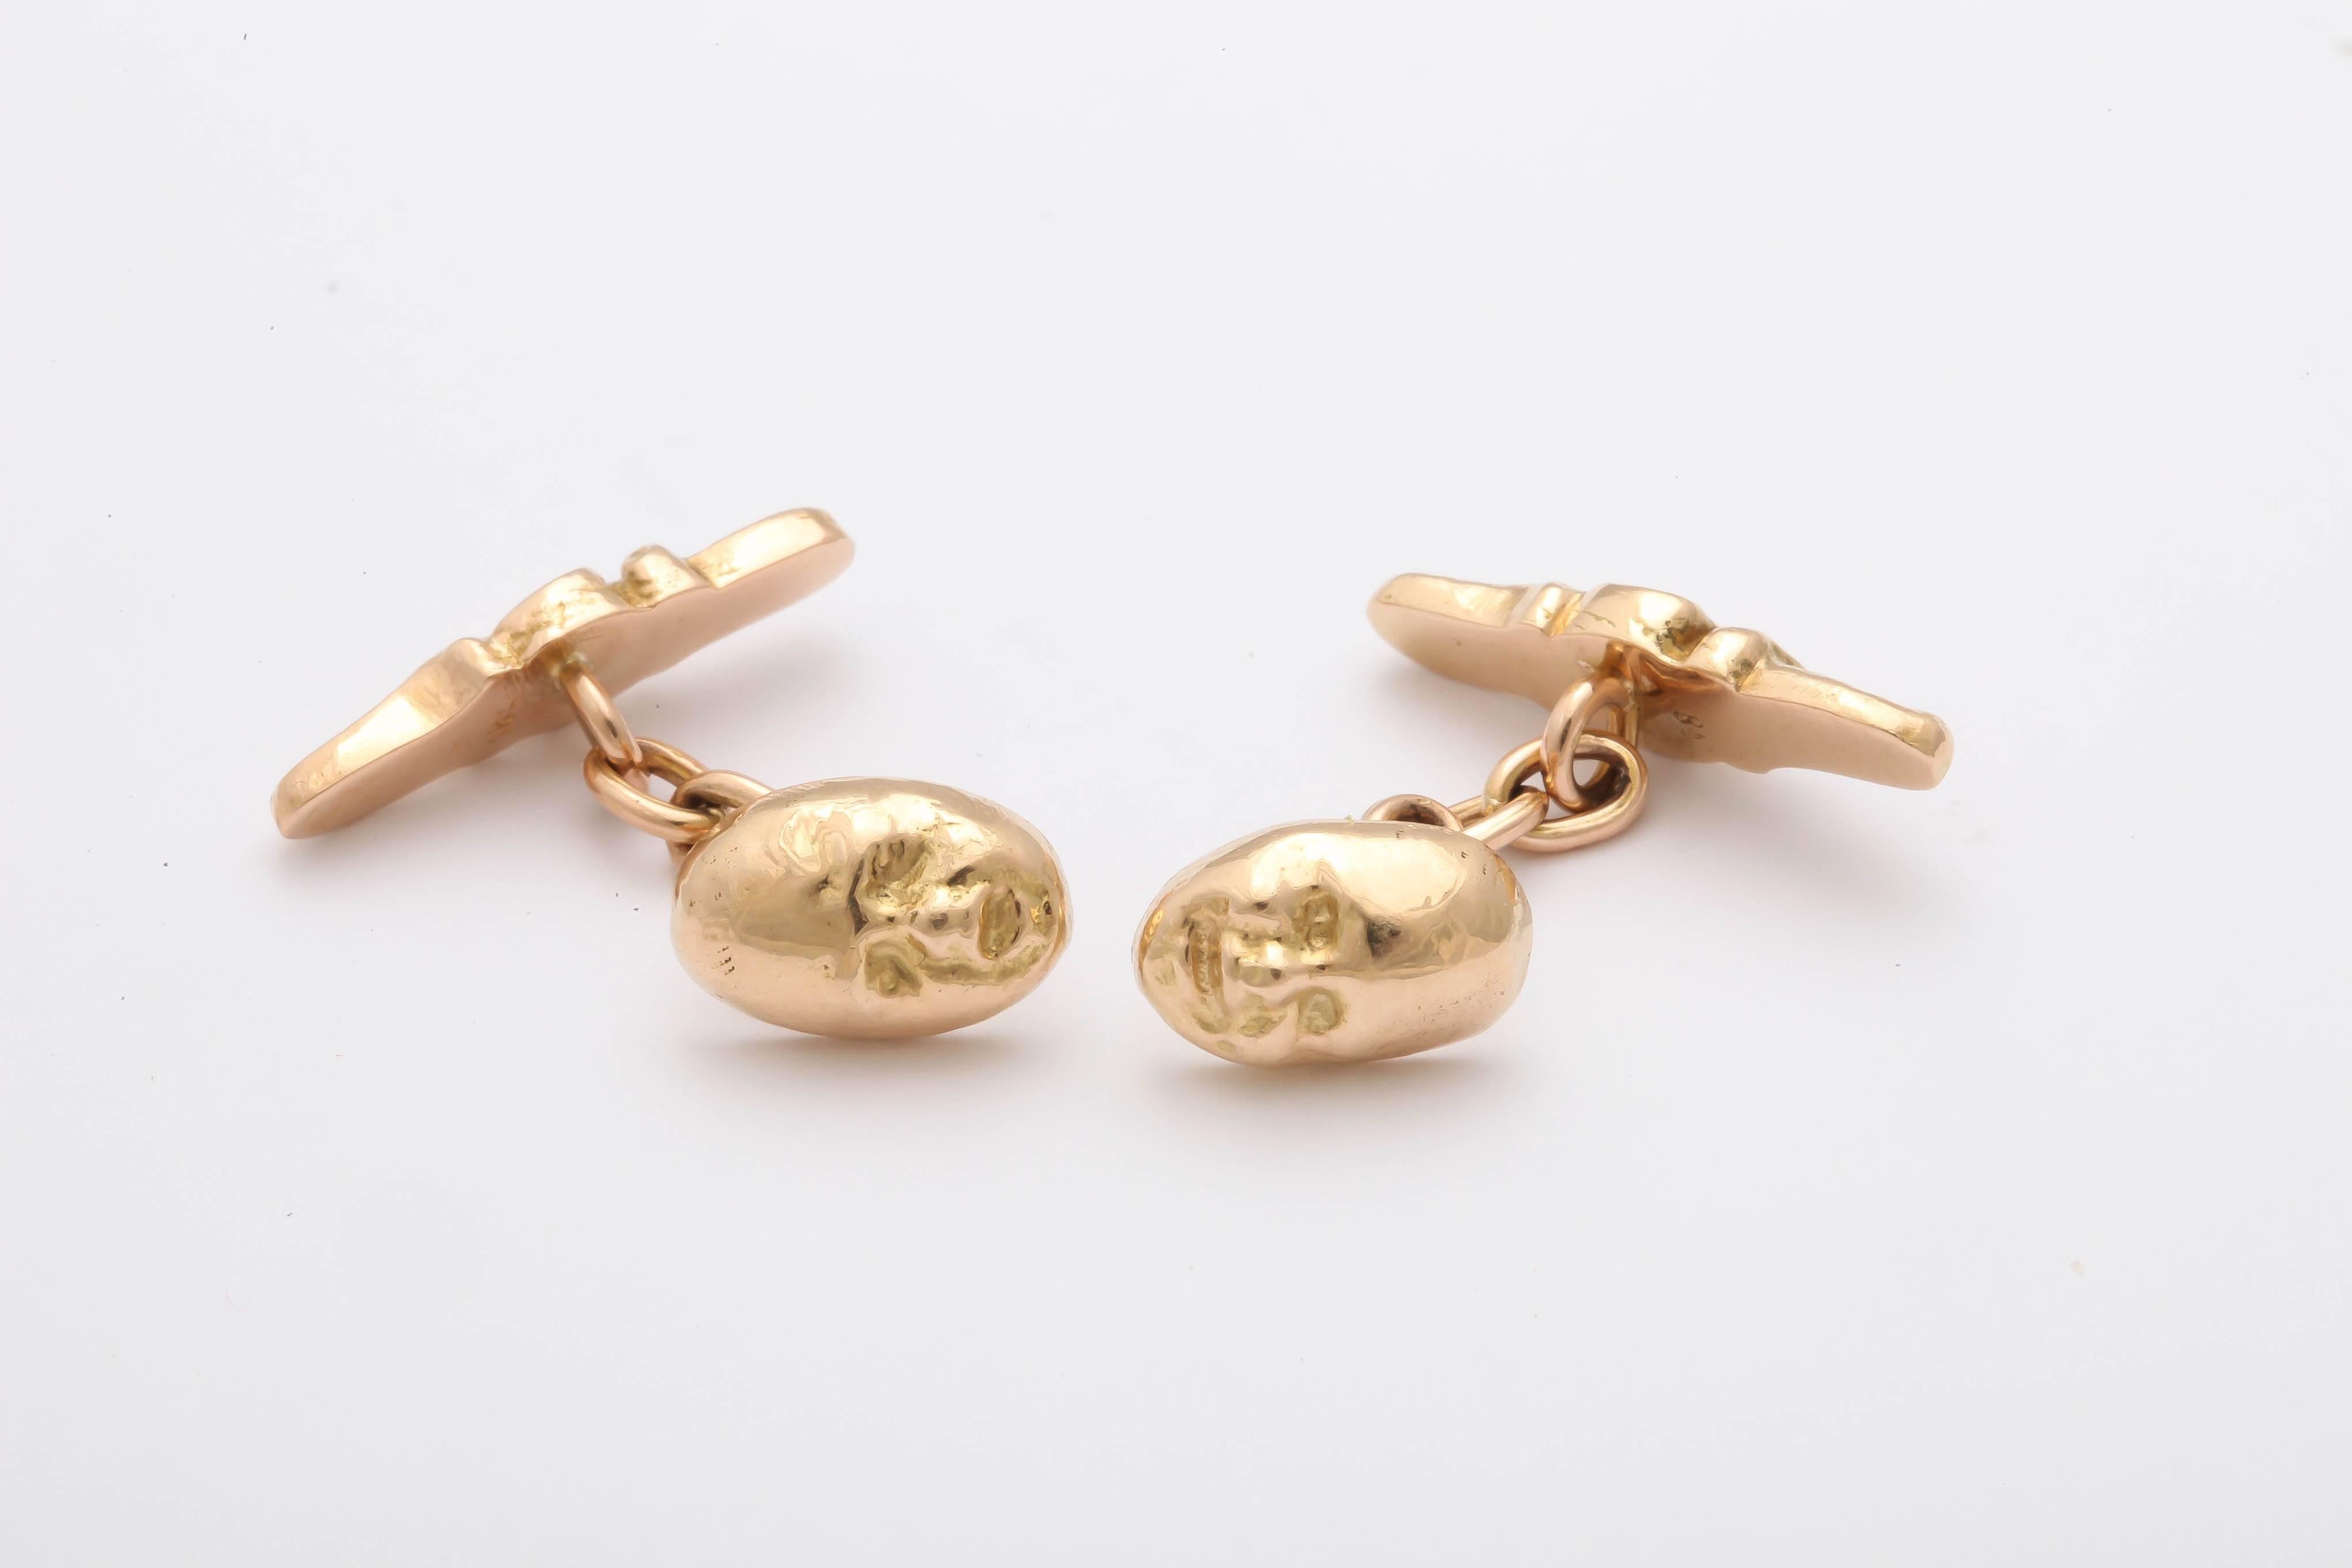 Victorian Small 19th Century 18k Gold Tragedy and Comedy Cufflinks For Sale